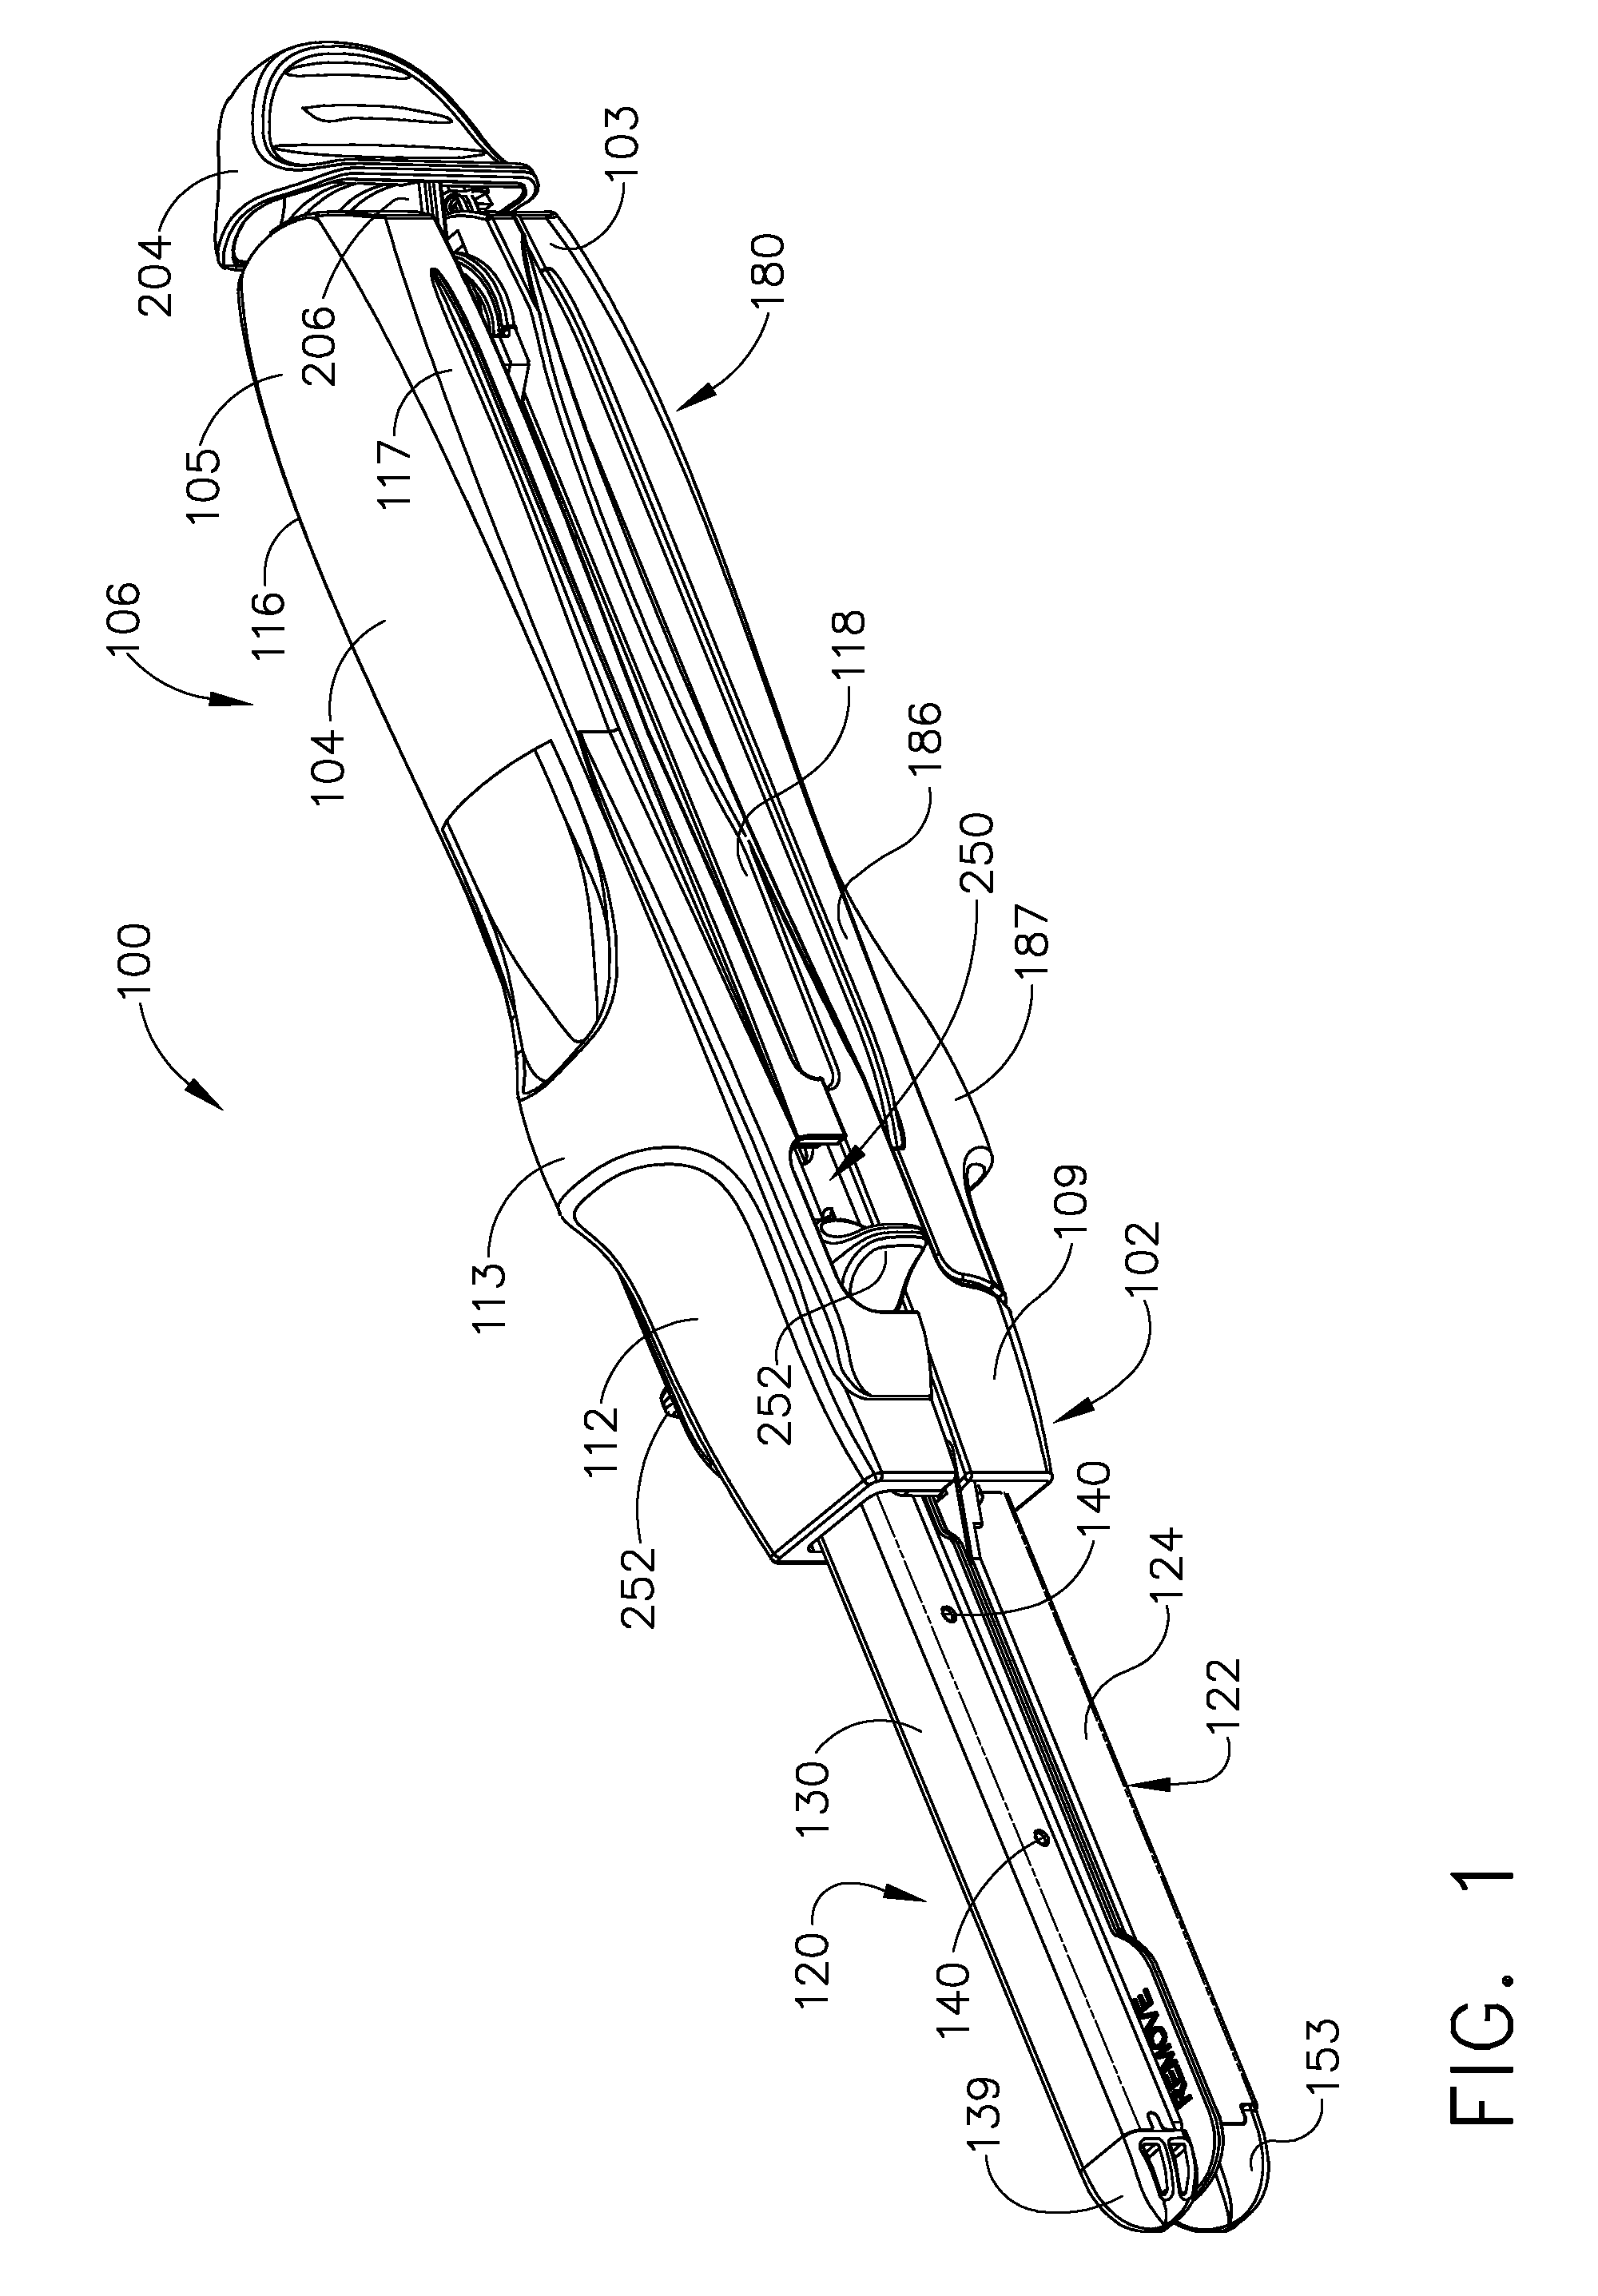 Surgical stapler with apparatus for adjusting staple height